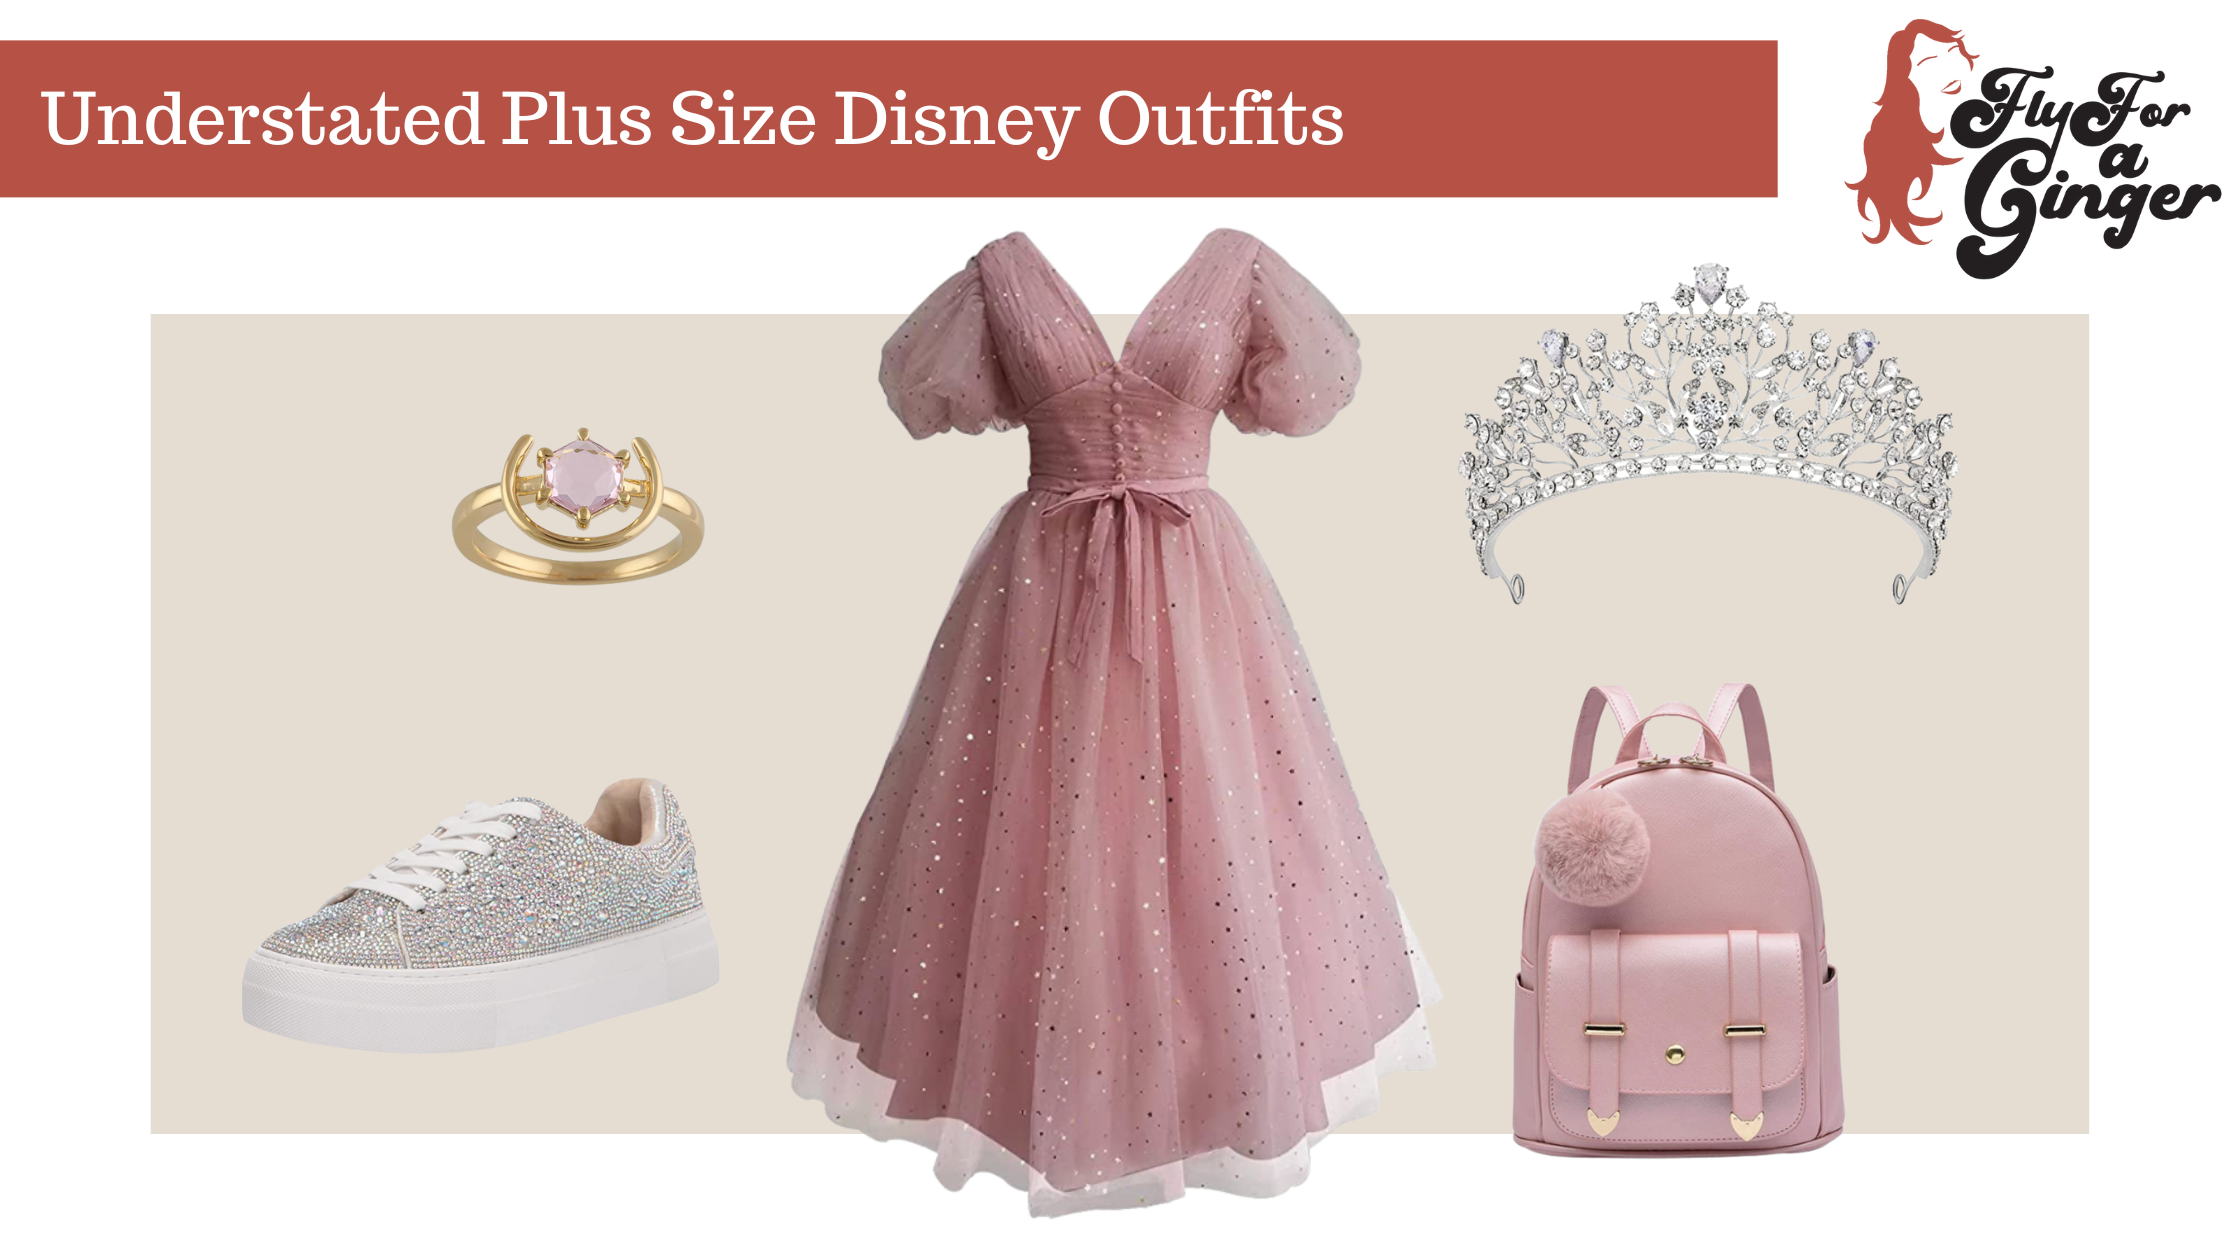 https://flyforaginger.com/wp-content/uploads/2023/01/Understated-Plus-Size-Disney-Outfits.png